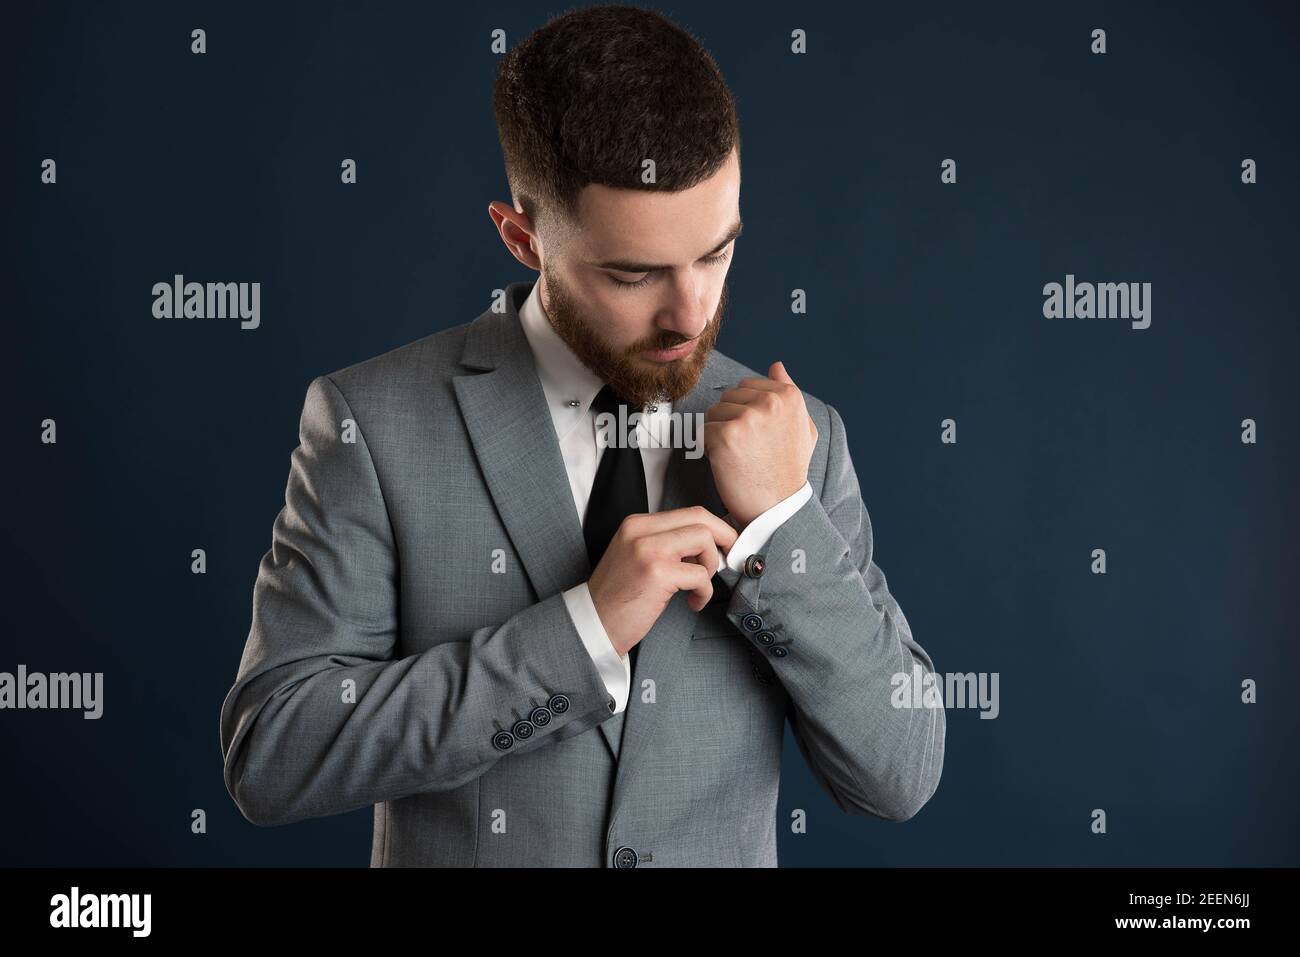 Handsome businessman fixing his shirt wearing a black tie and grey jacket Stock Photo